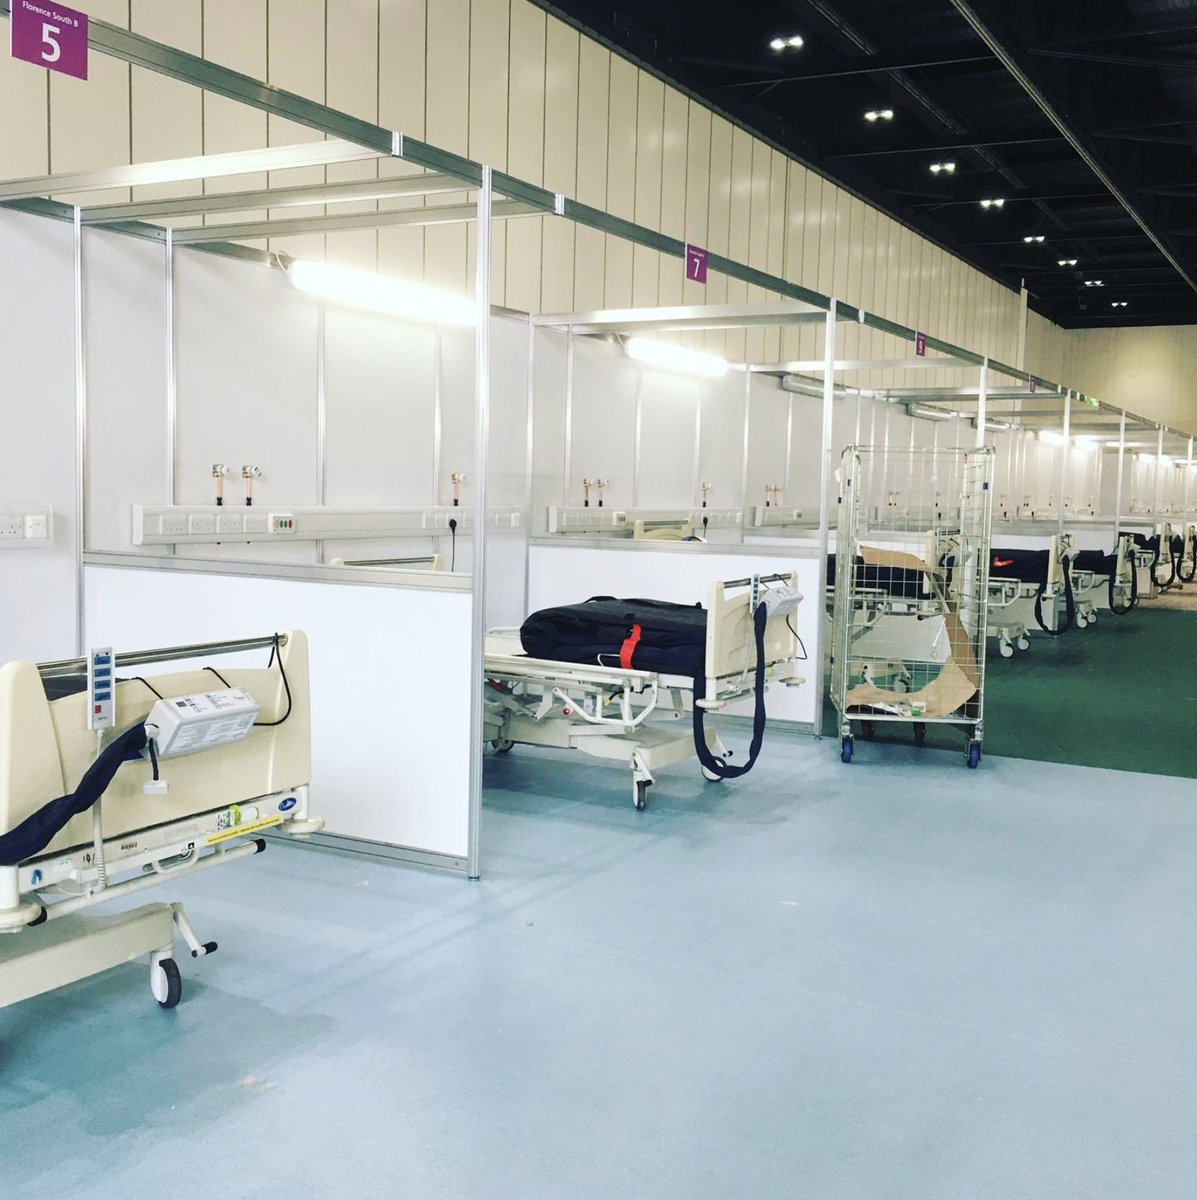 Pictures from inside the completed NHS Nightingale hospital at Excel Centre, which was built in *one week*. This is an incredible achievement and everyone involved should be very proud